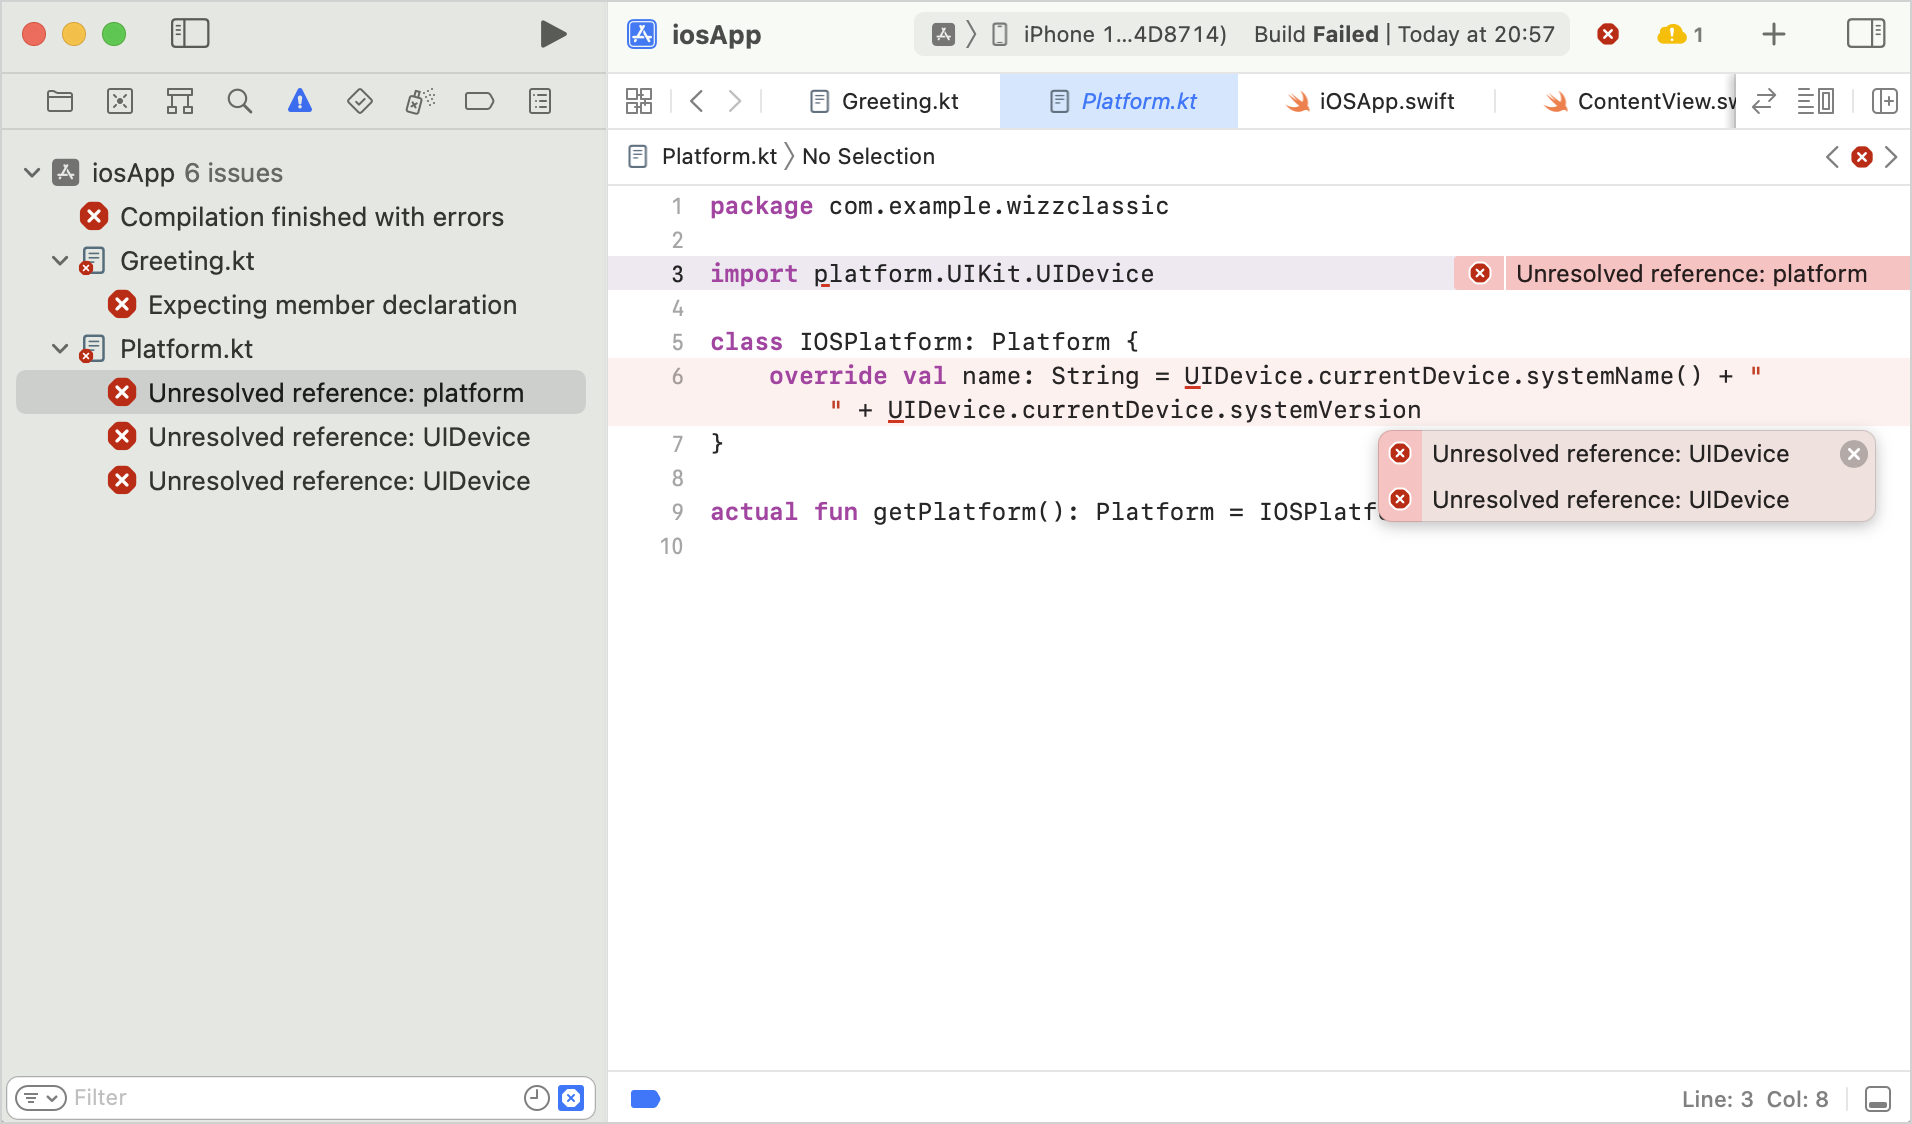 Improved output for Gradle errors in Xcode